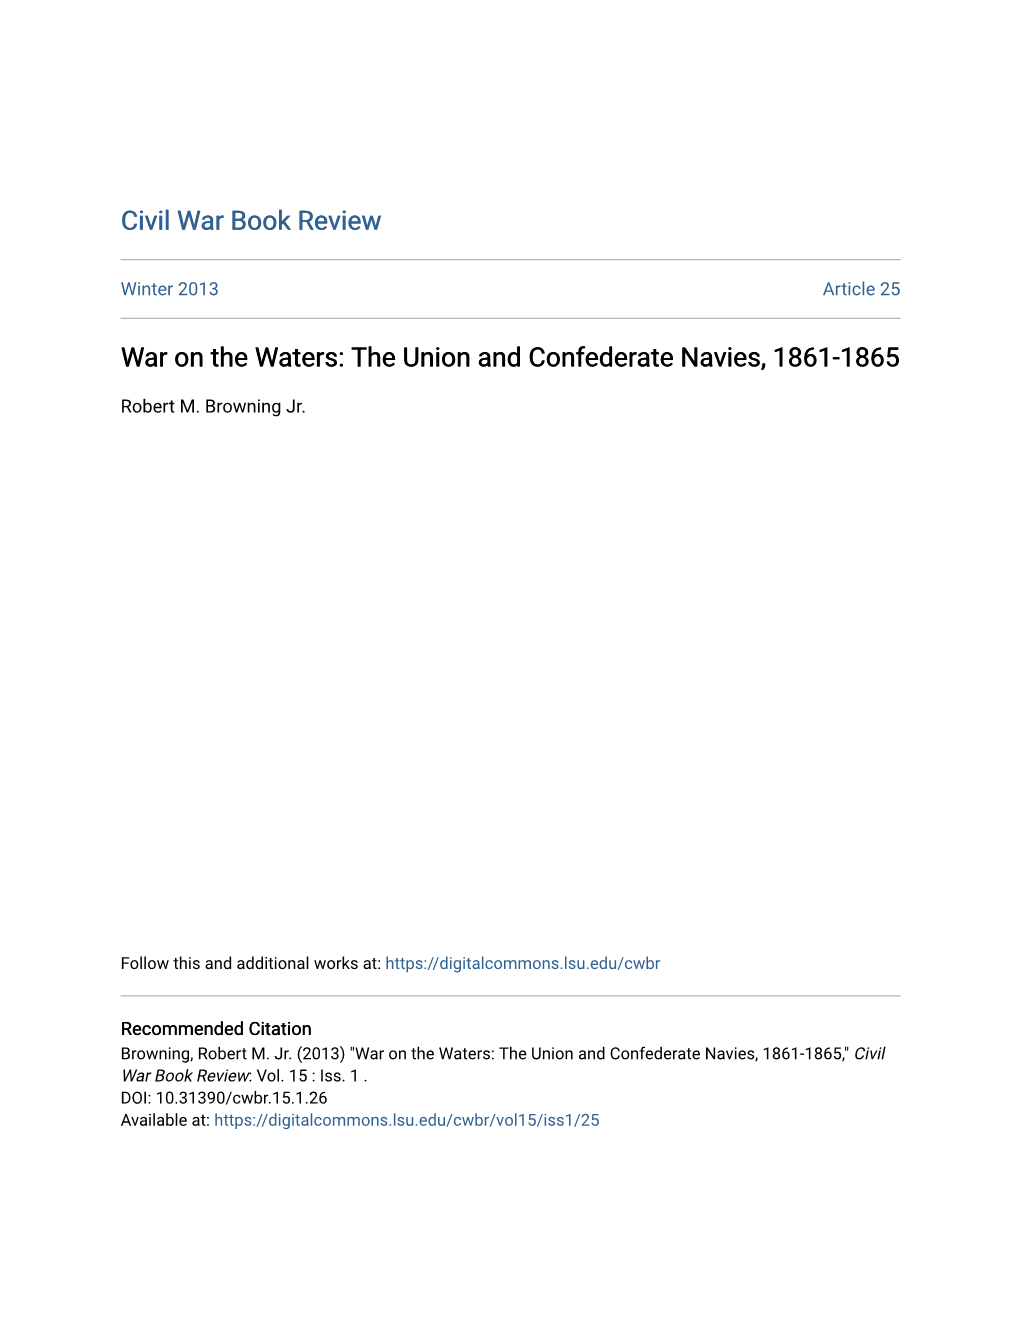 War on the Waters: the Union and Confederate Navies, 1861-1865